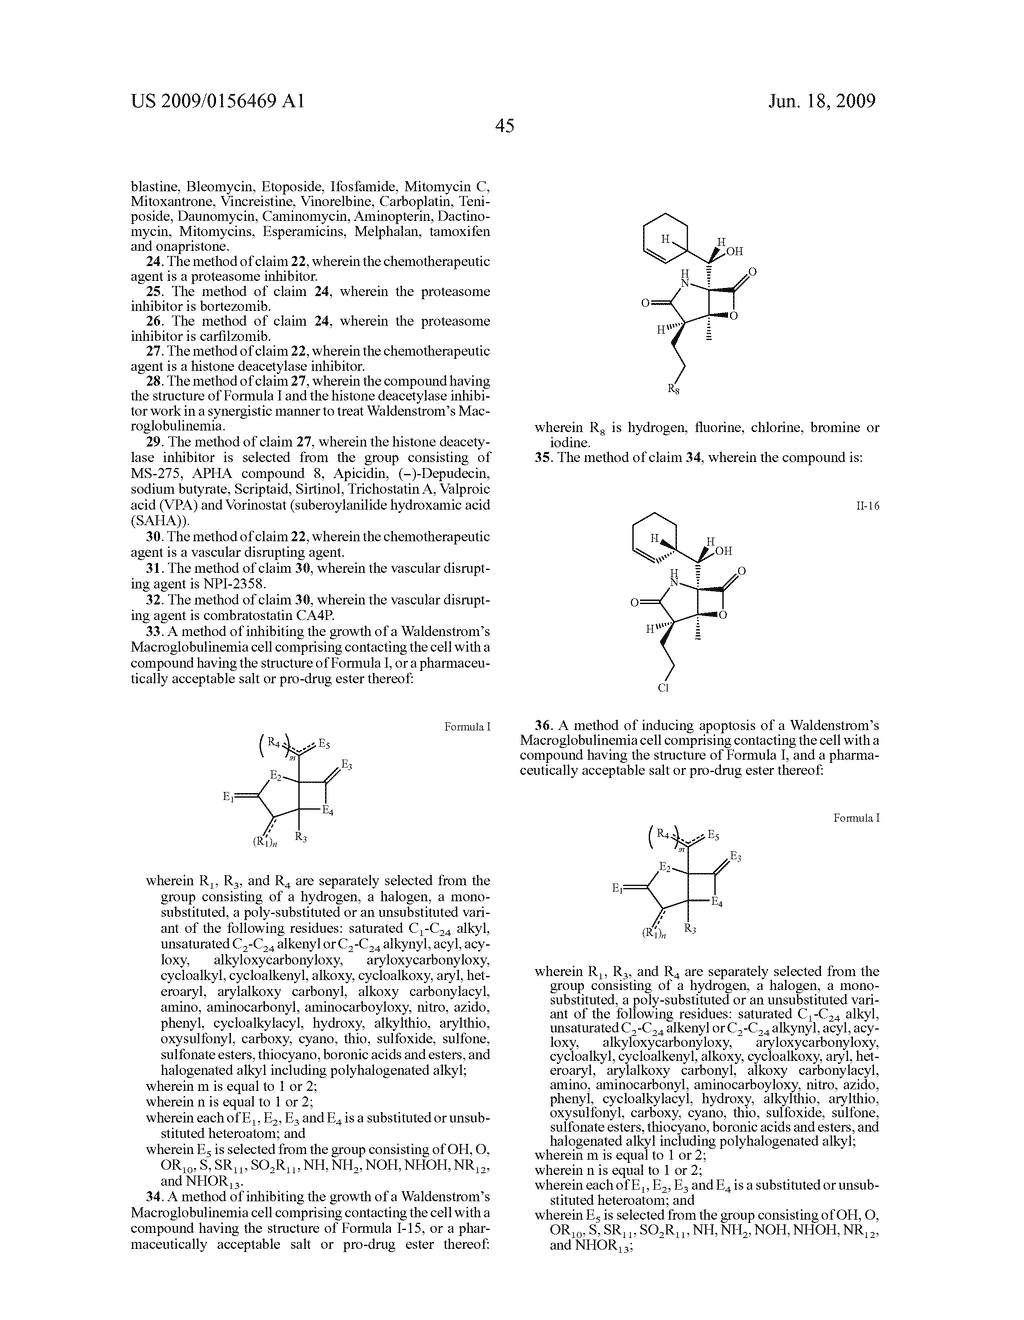 METHODS OF USING [3.2.0] HETEROCYCLIC COMPOUNDS AND ANALOGS THEREOF IN TREATING WALDENSTROM'S MACROGLOBULINEMIA - diagram, schematic, and image 61